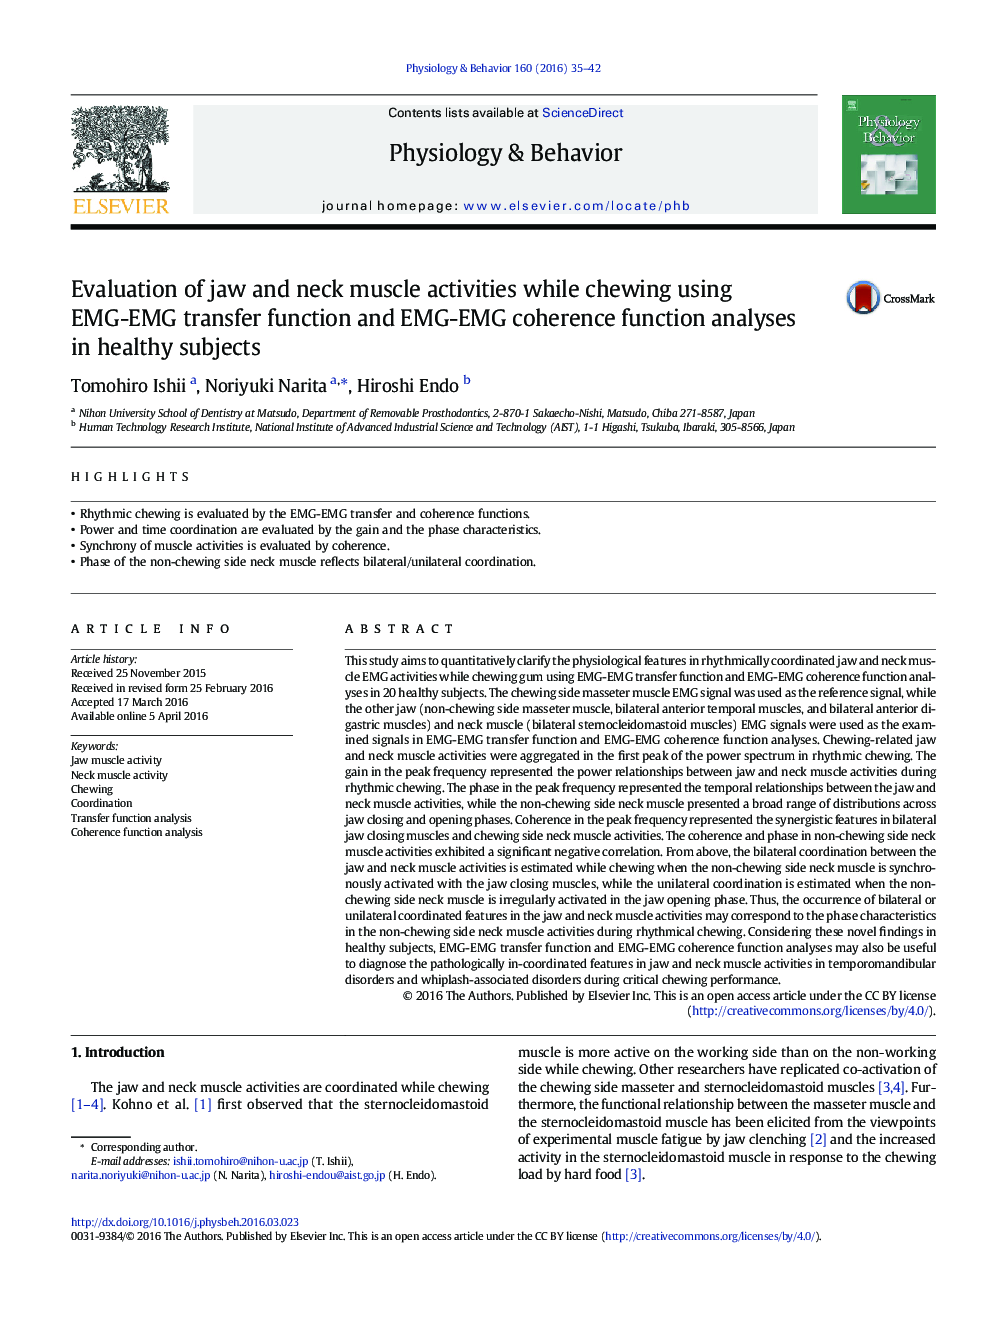 Evaluation of jaw and neck muscle activities while chewing using EMG-EMG transfer function and EMG-EMG coherence function analyses in healthy subjects